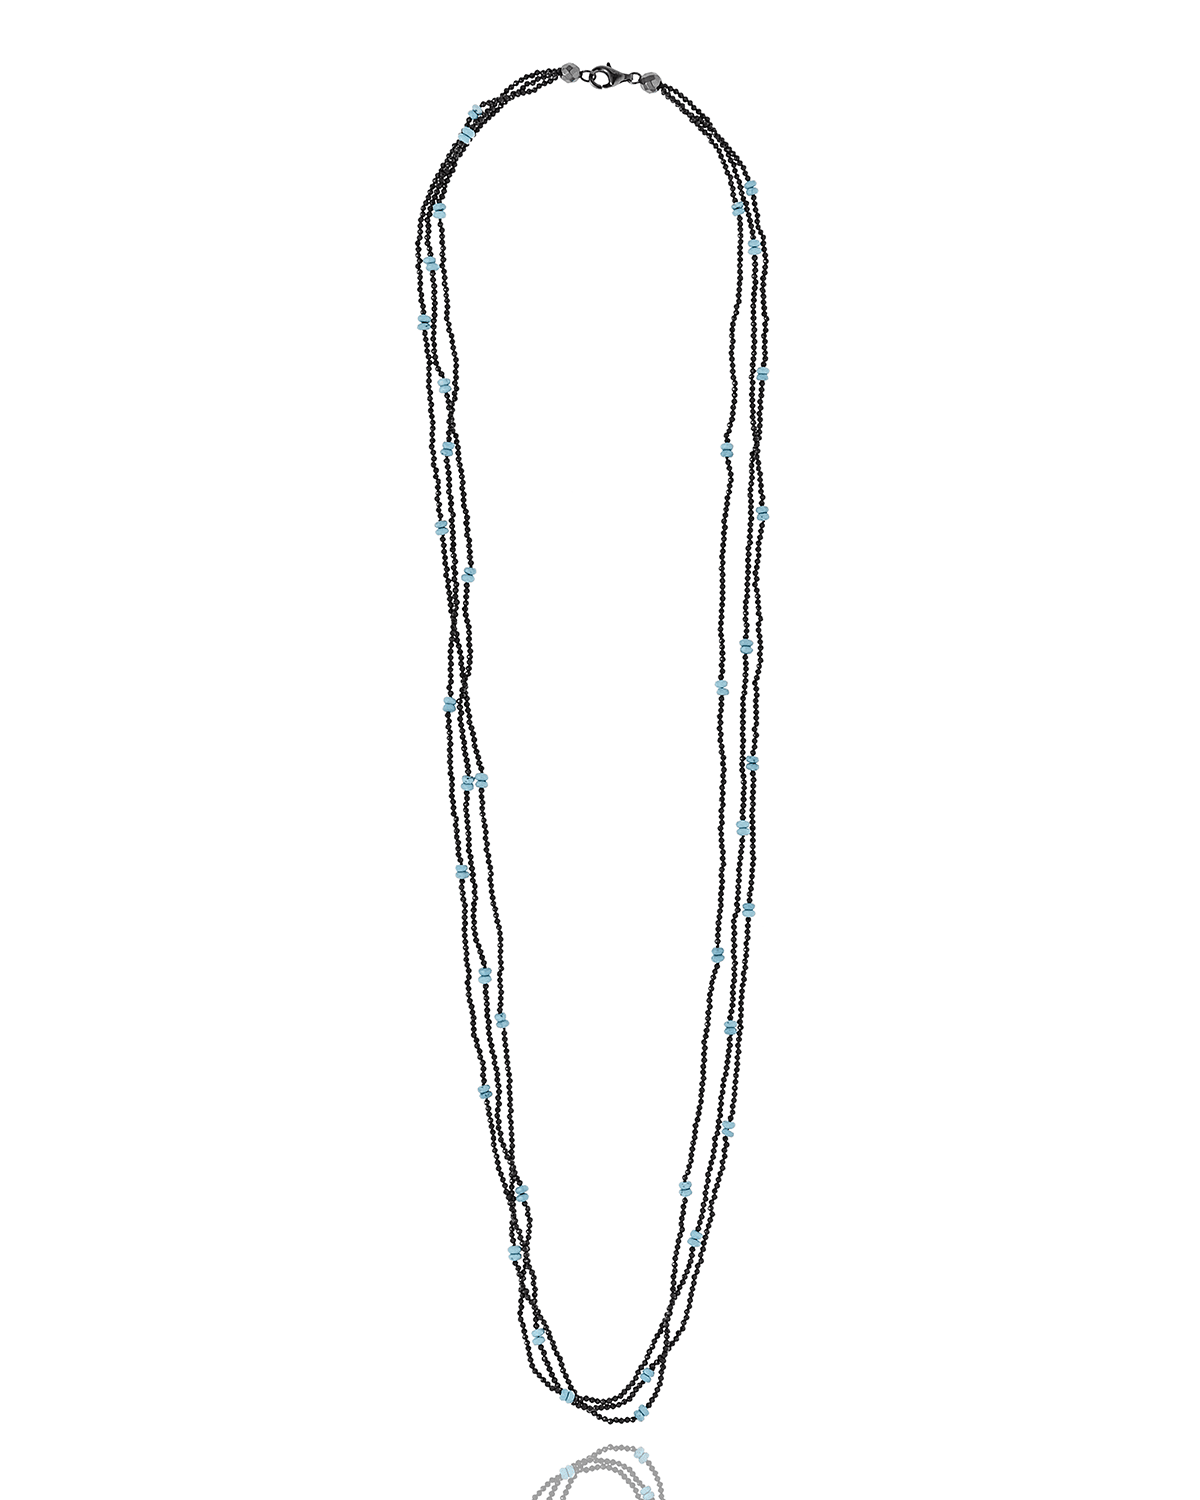 M.C.L. by Matthew Campbell Laurenza Long Triple-Strand Silver Spinel & Turquoise Necklace